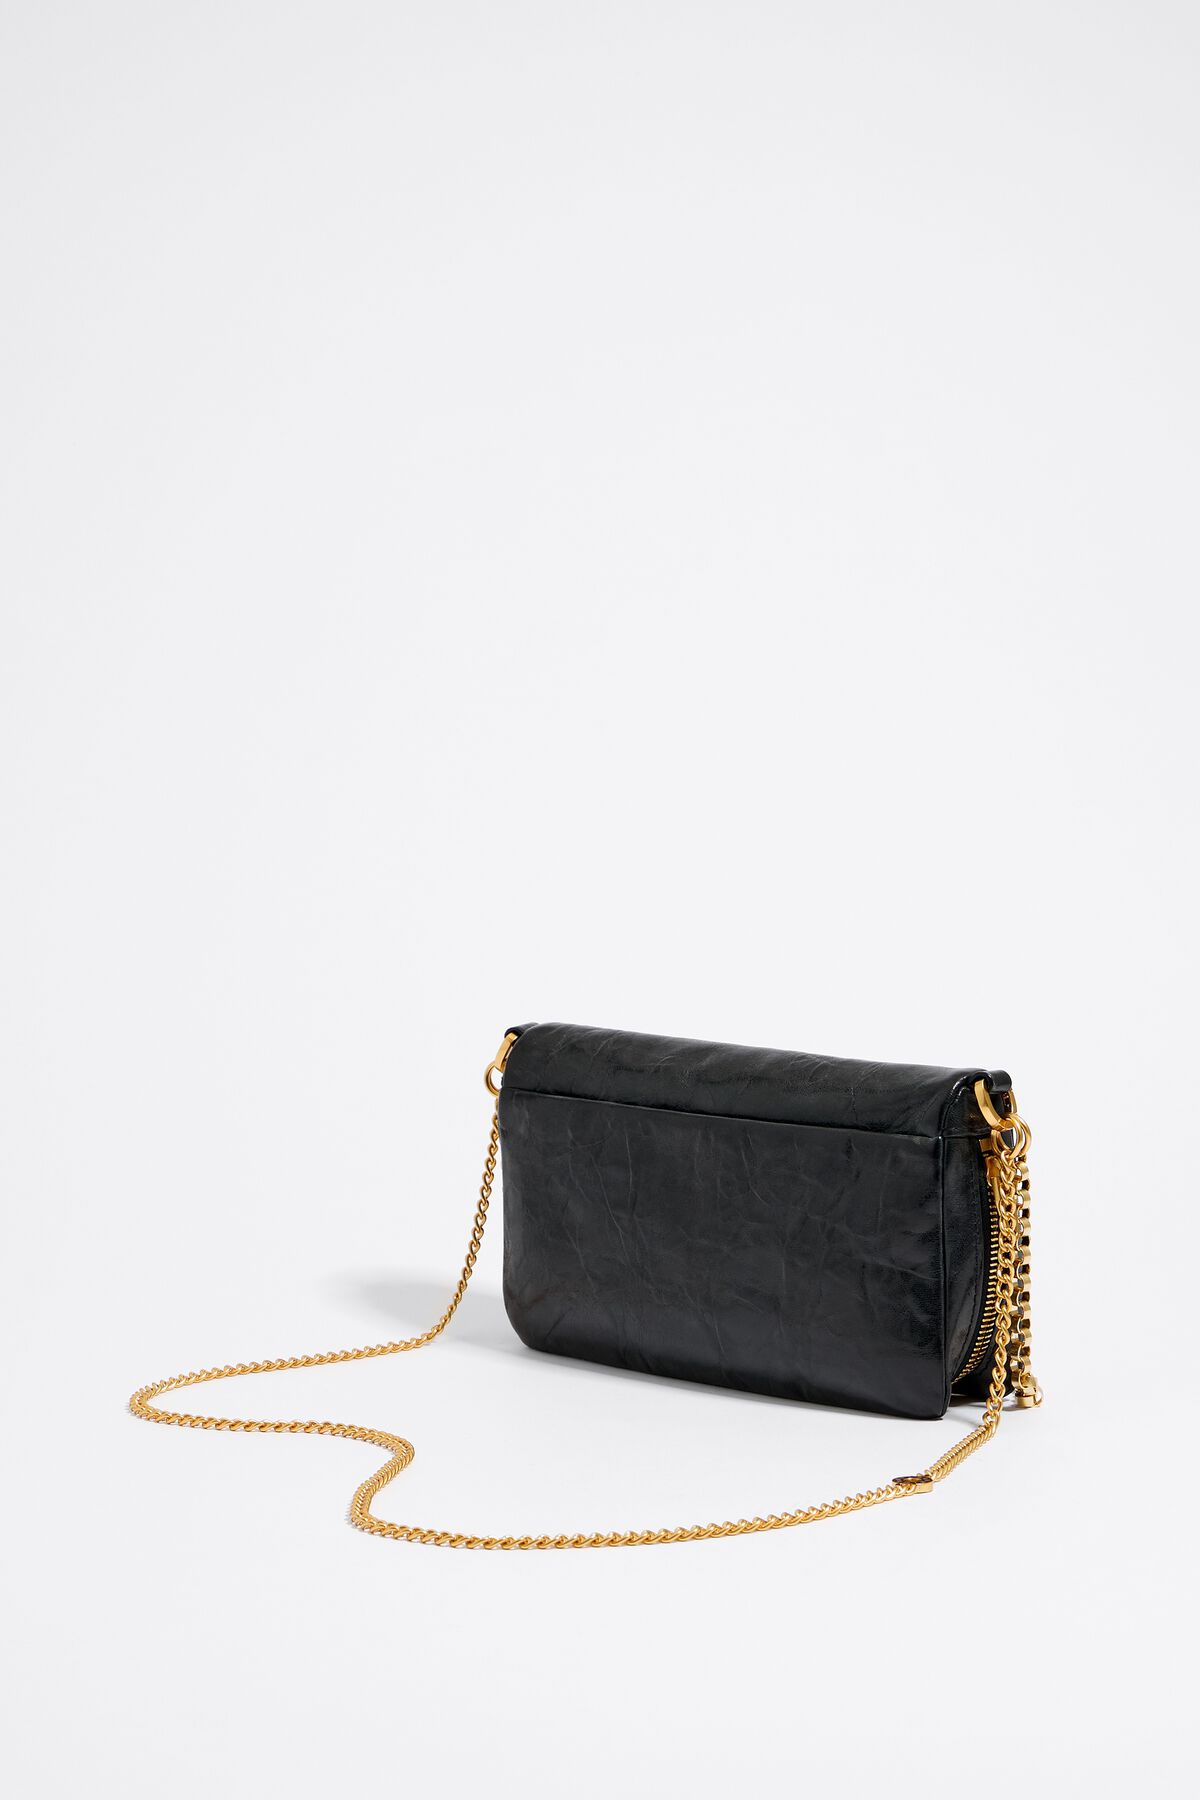 Bimba Y Lola women's bags Shop for stylish bags and cases online